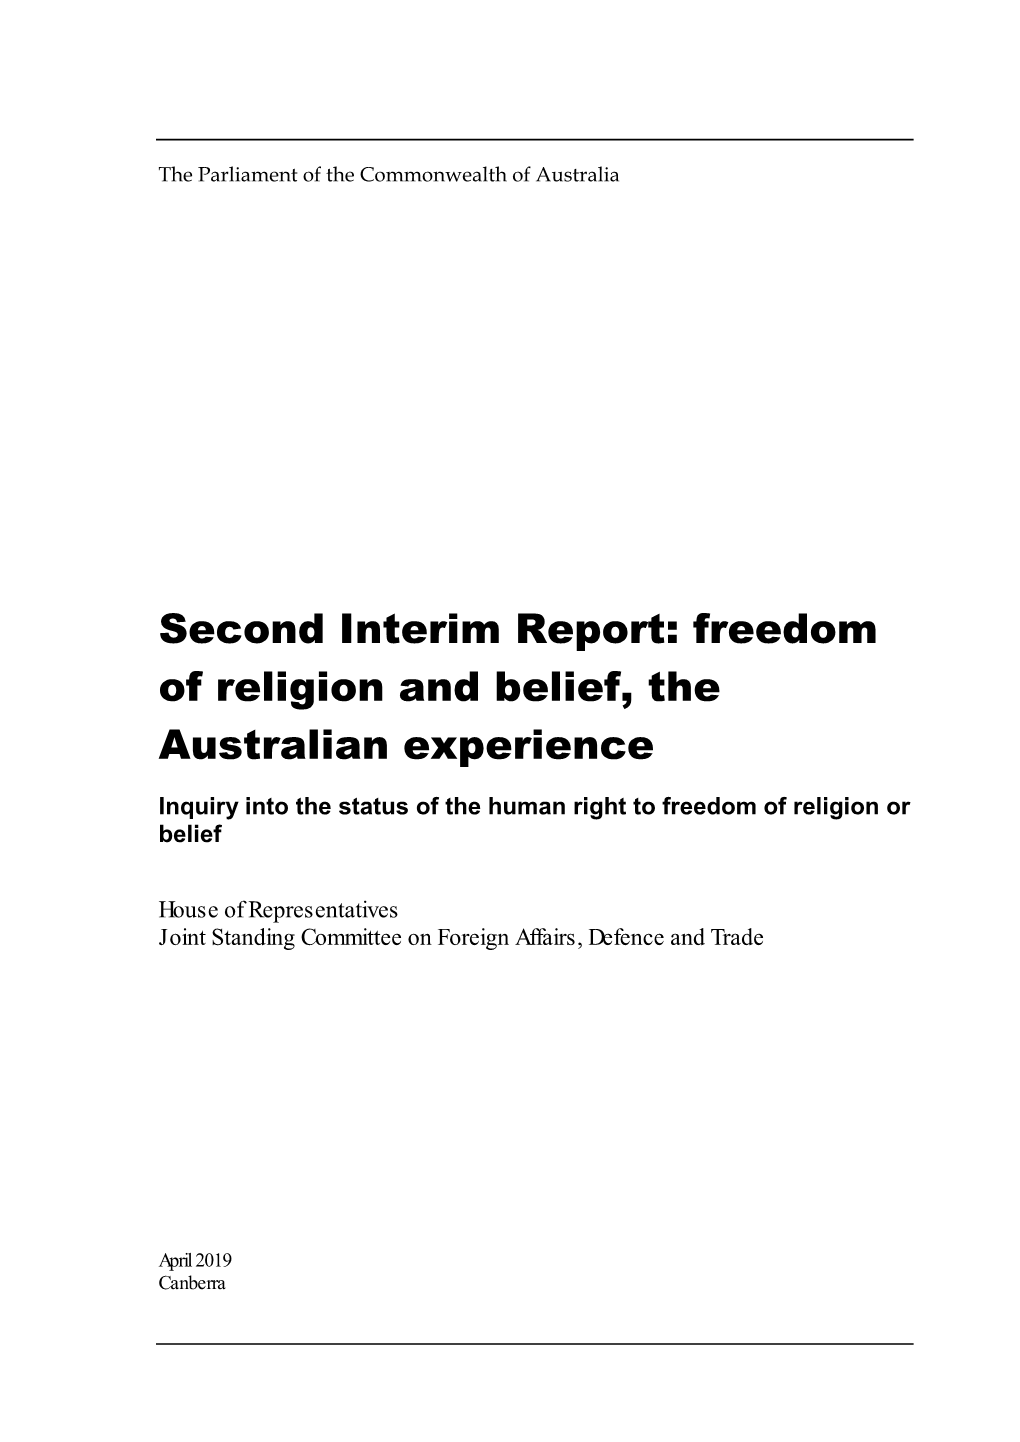 Second Interim Report: Freedom of Religion and Belief, the Australian Experience